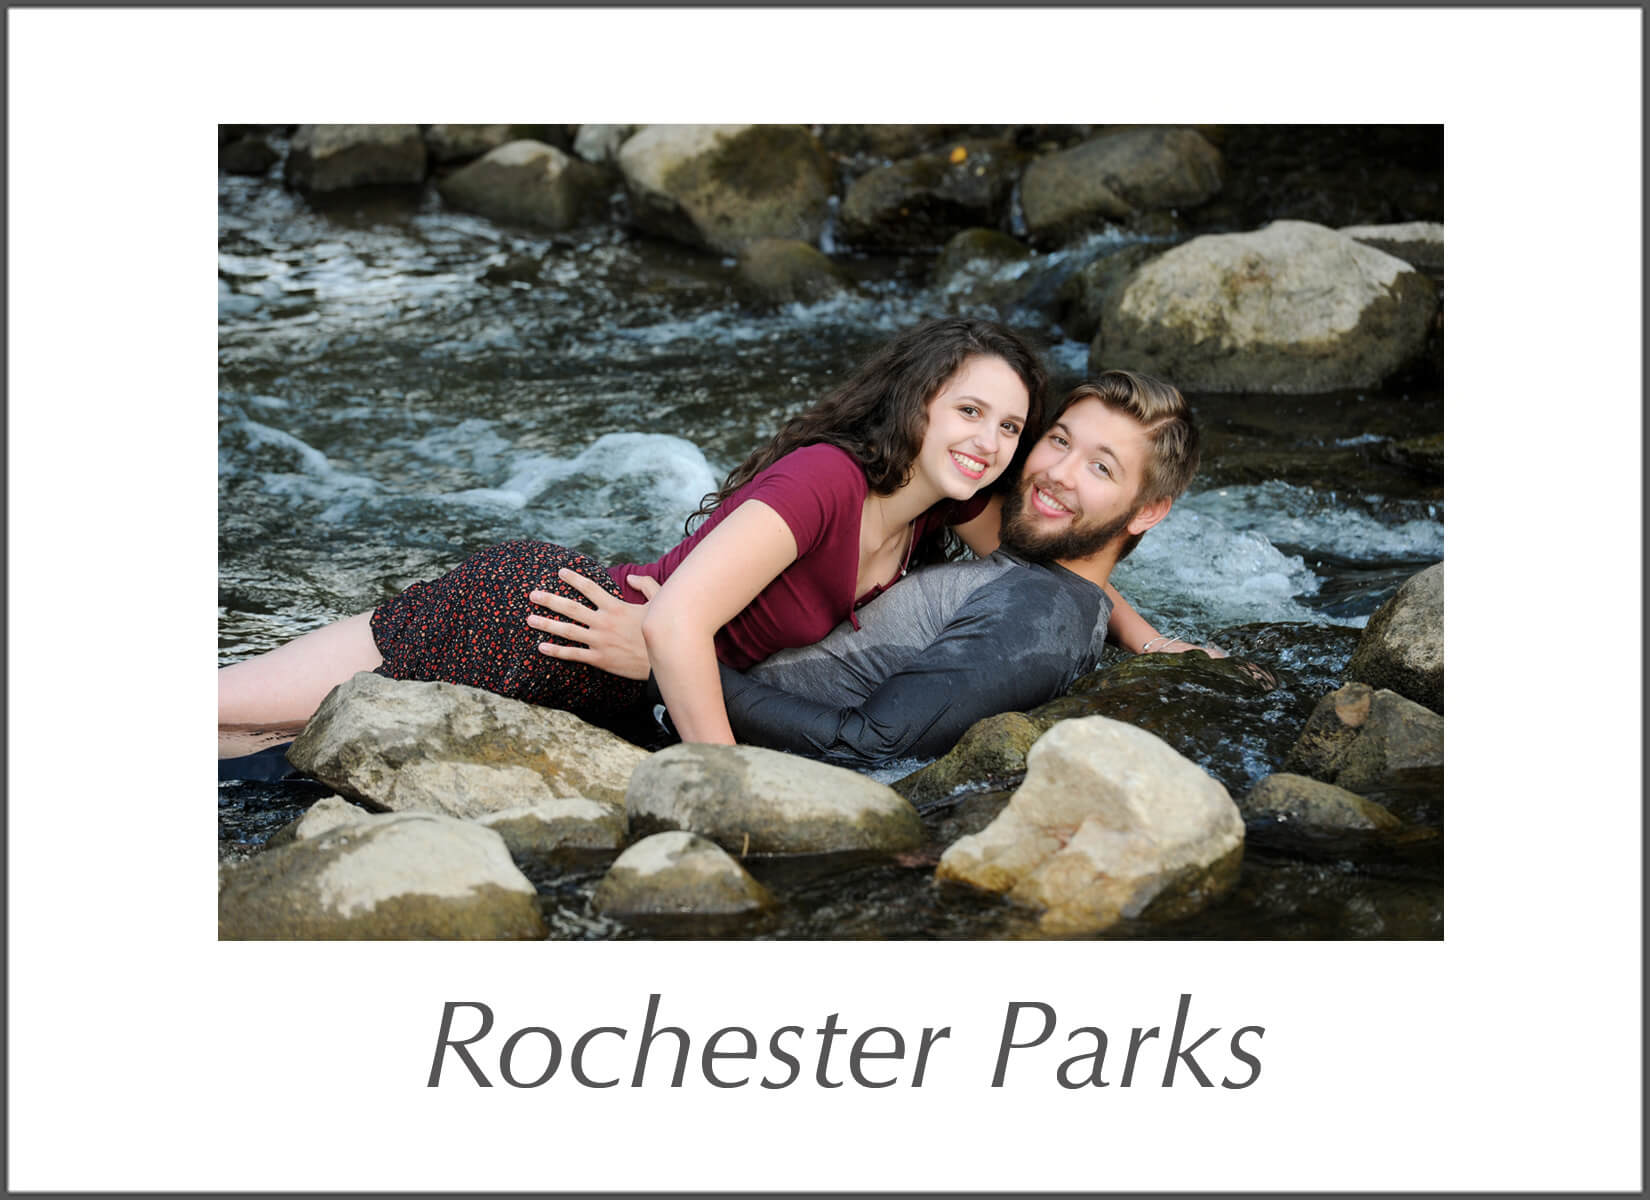 Michigan wedding photojournalist uses park and downtown Rochester in south east Michigan to photograph fun, candid style outdoor portrait sessions